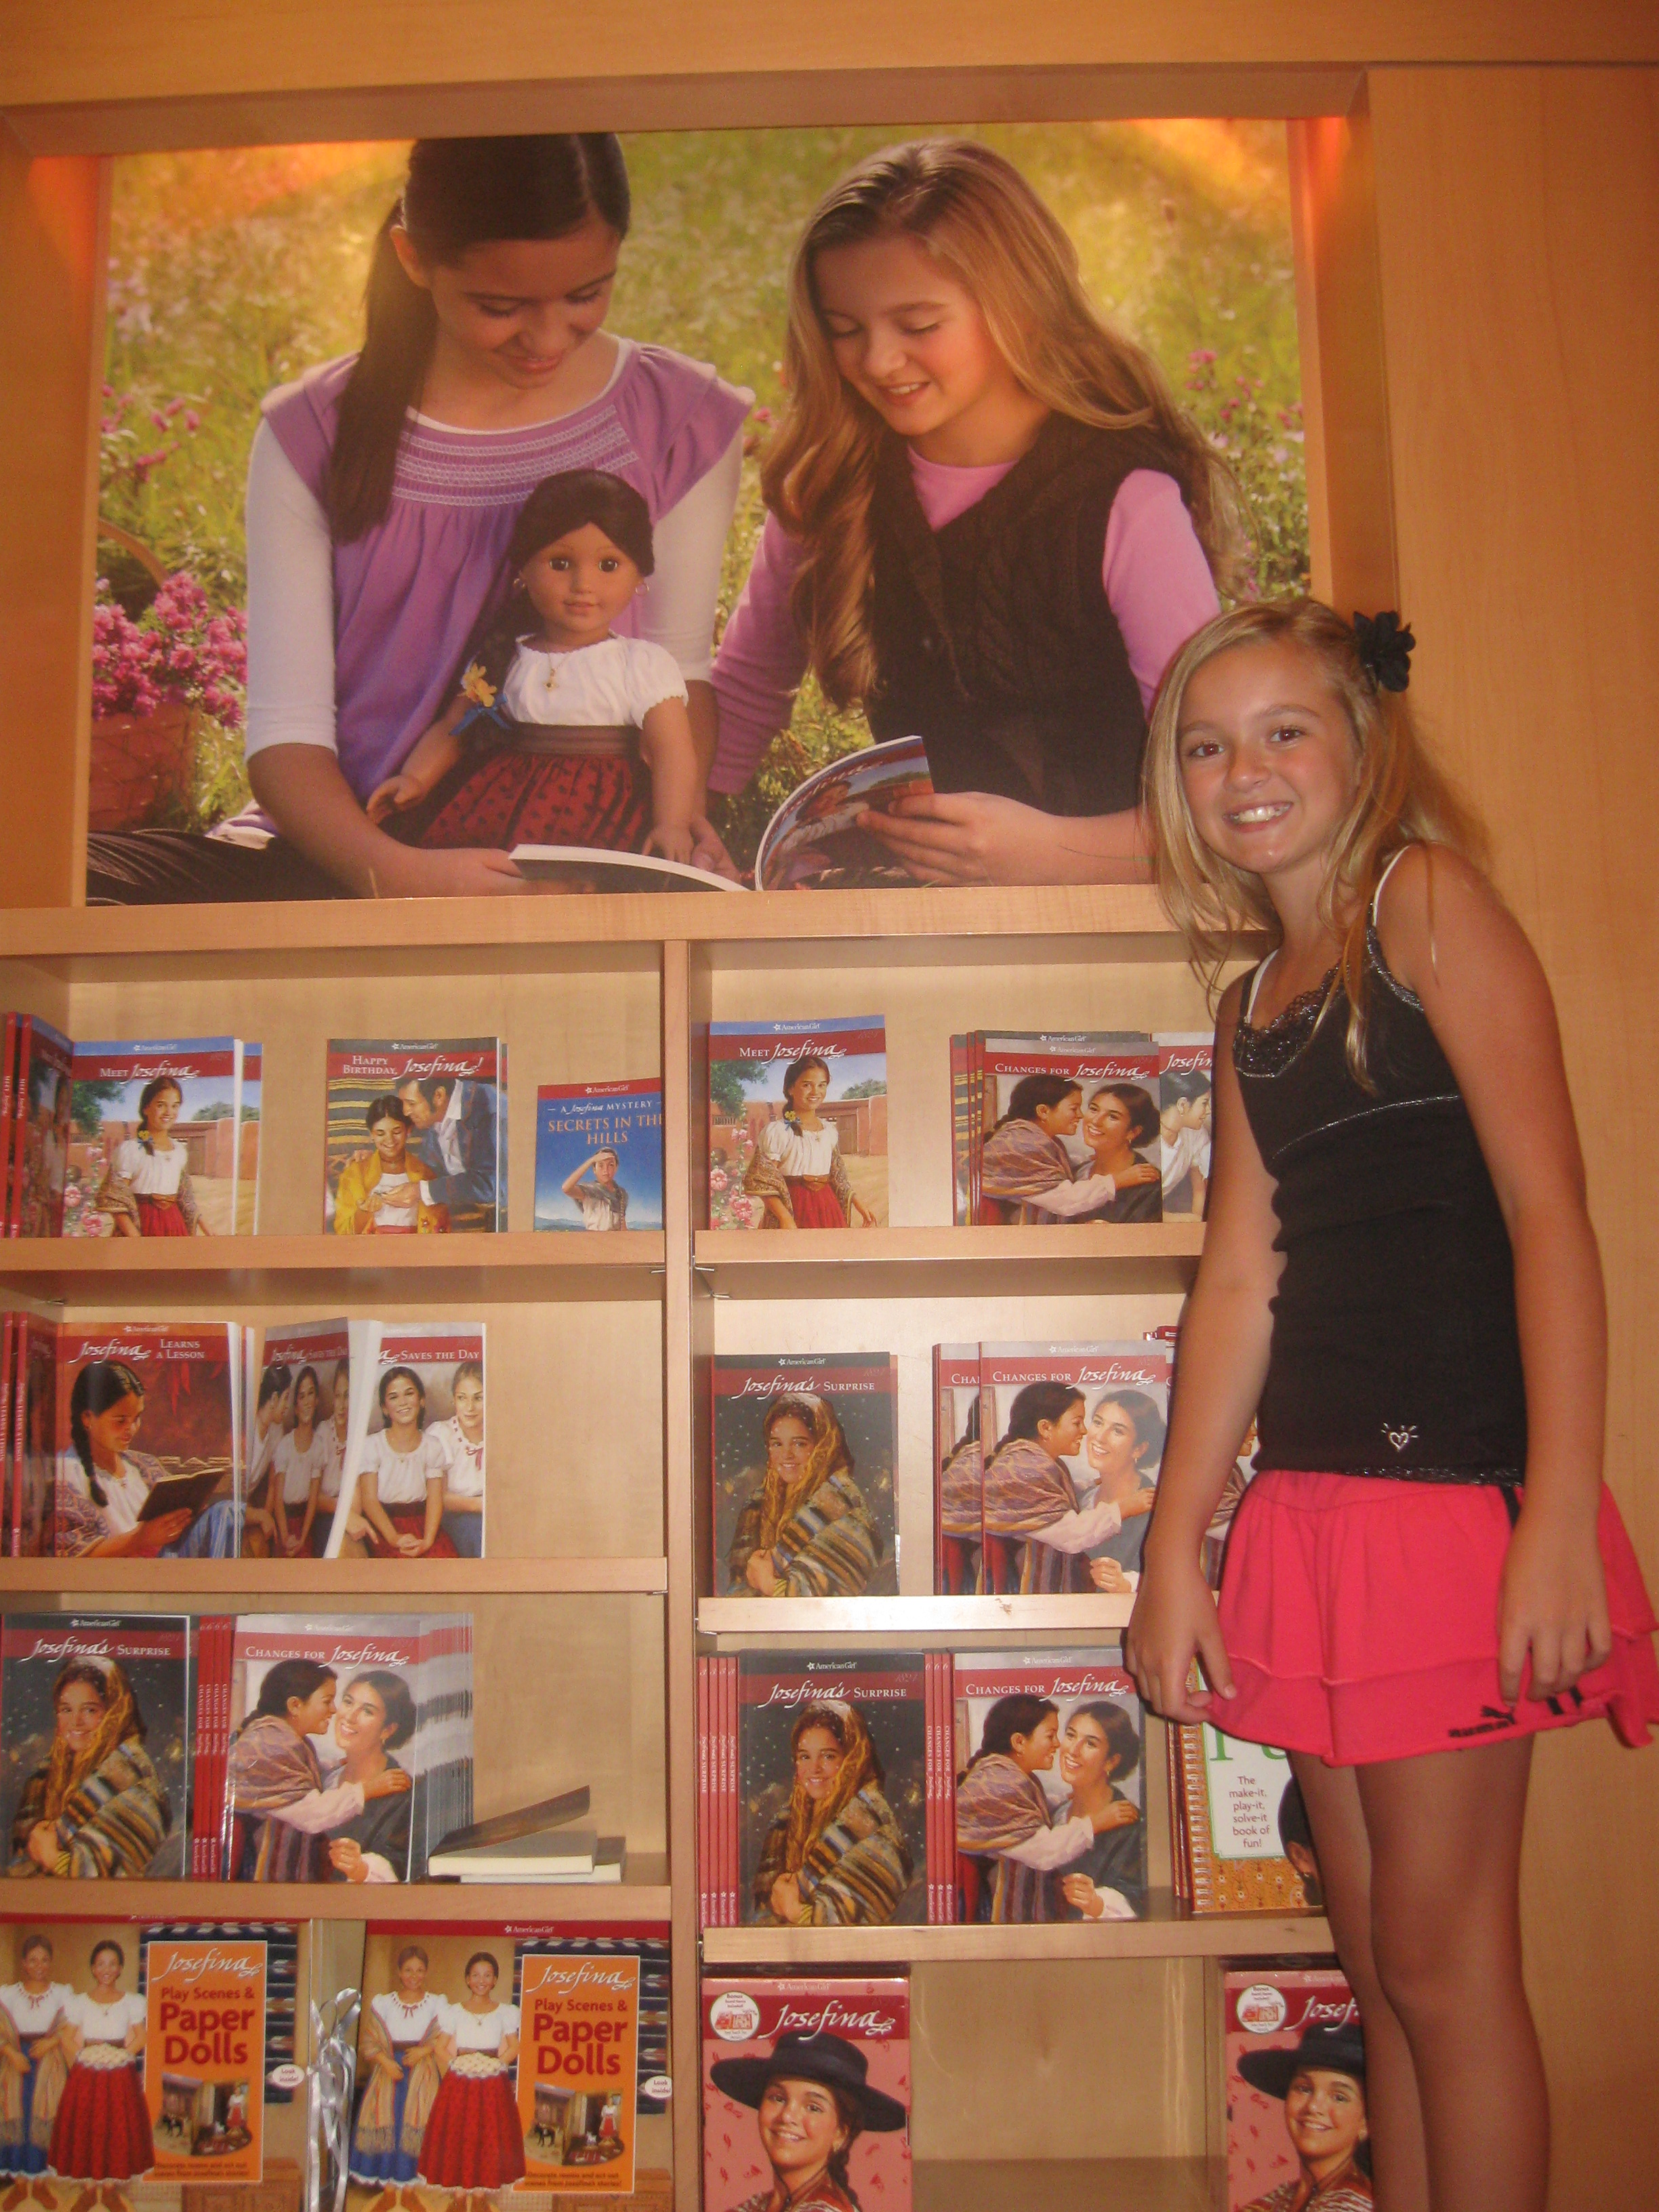 Woah two Madisons at the American Girl store?